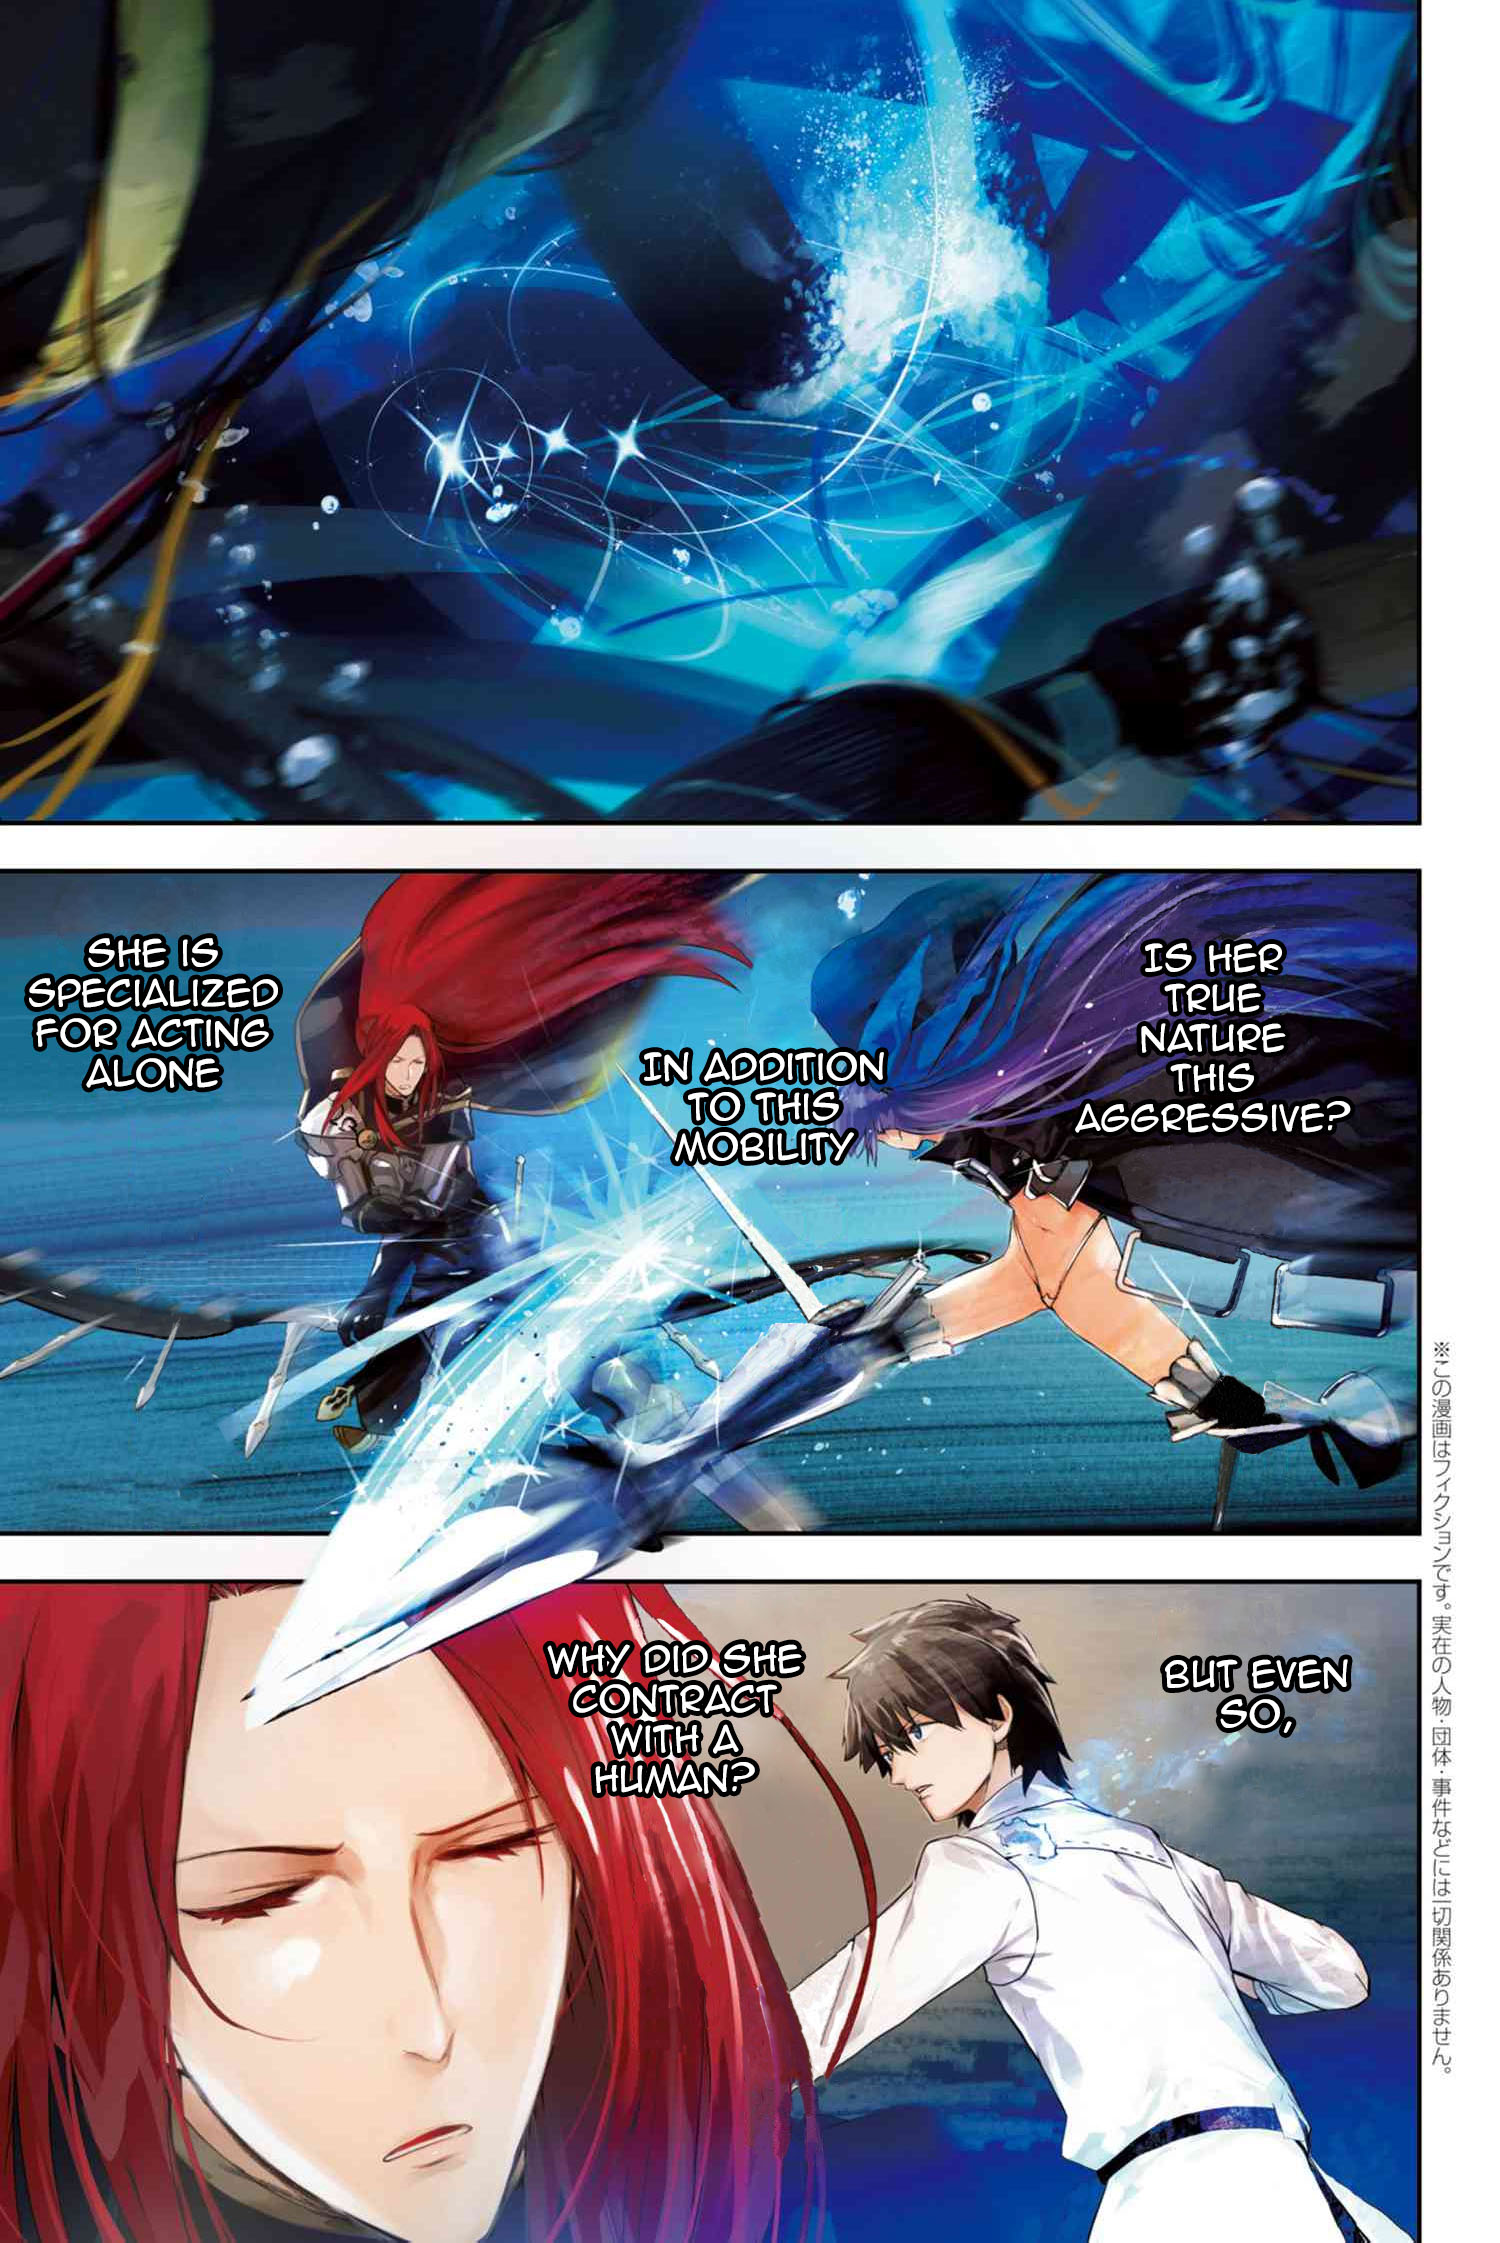 Fate/grand Order -Epic Of Remnant- Deep Sea Cyber-Paradise Se.ra.ph - Page 1